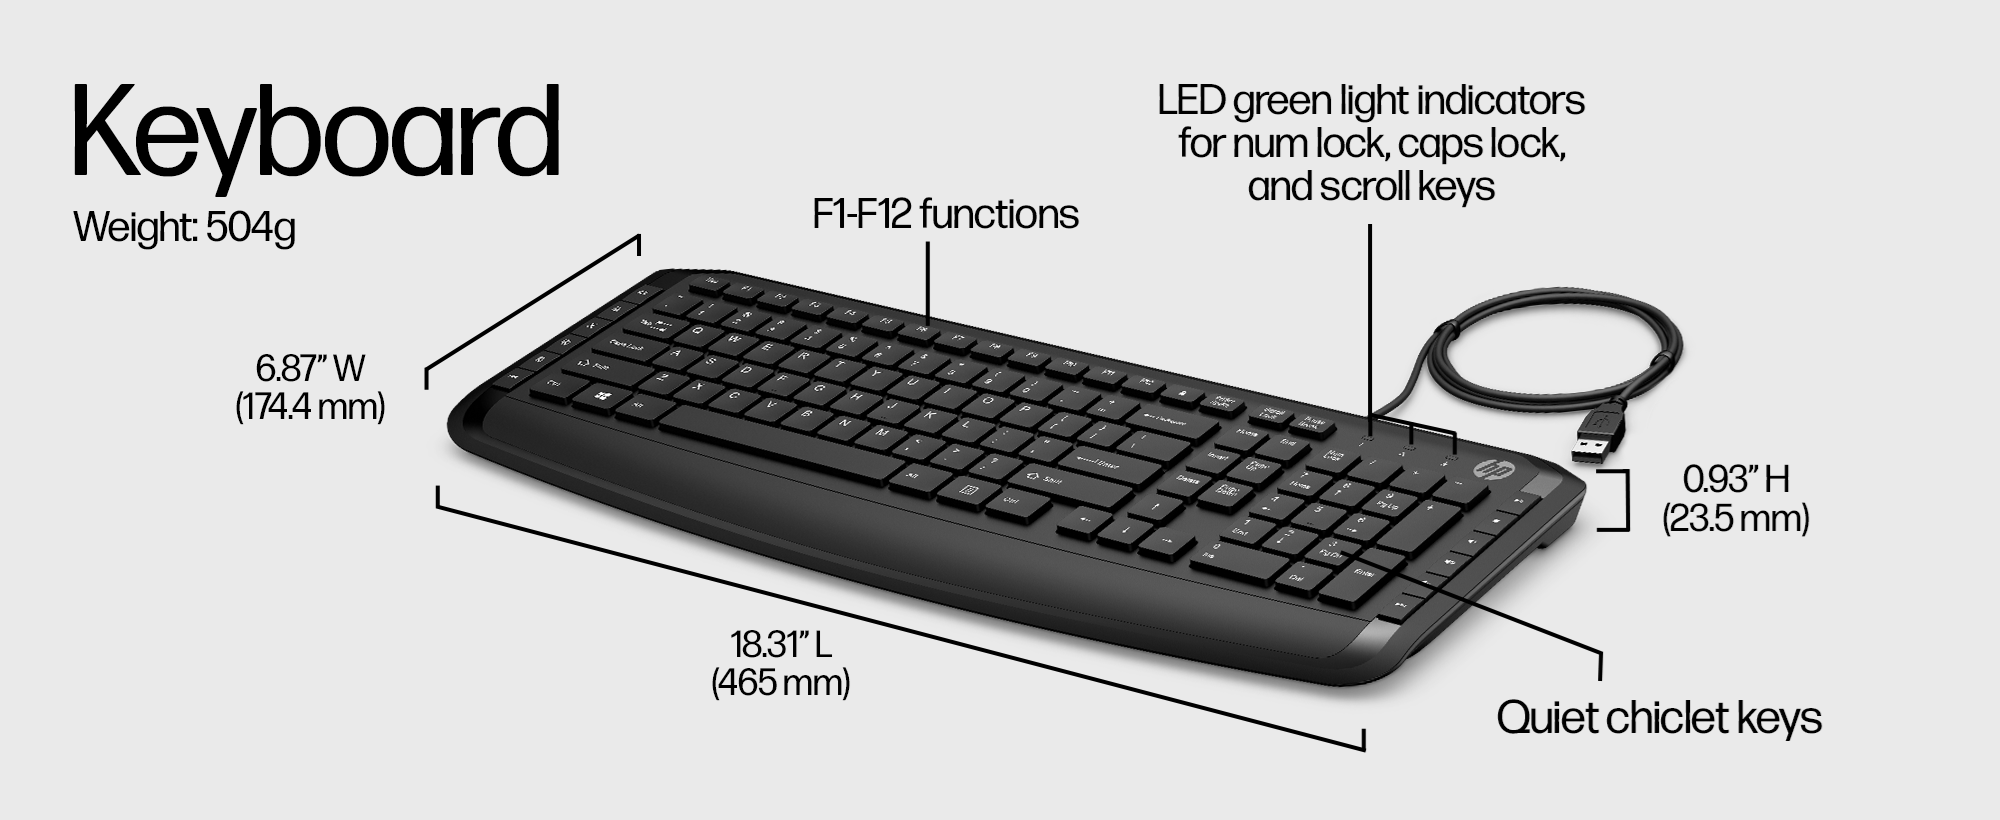 keyboard black set - Pavilion - 9DF28AA#ABL - HP mouse and 200